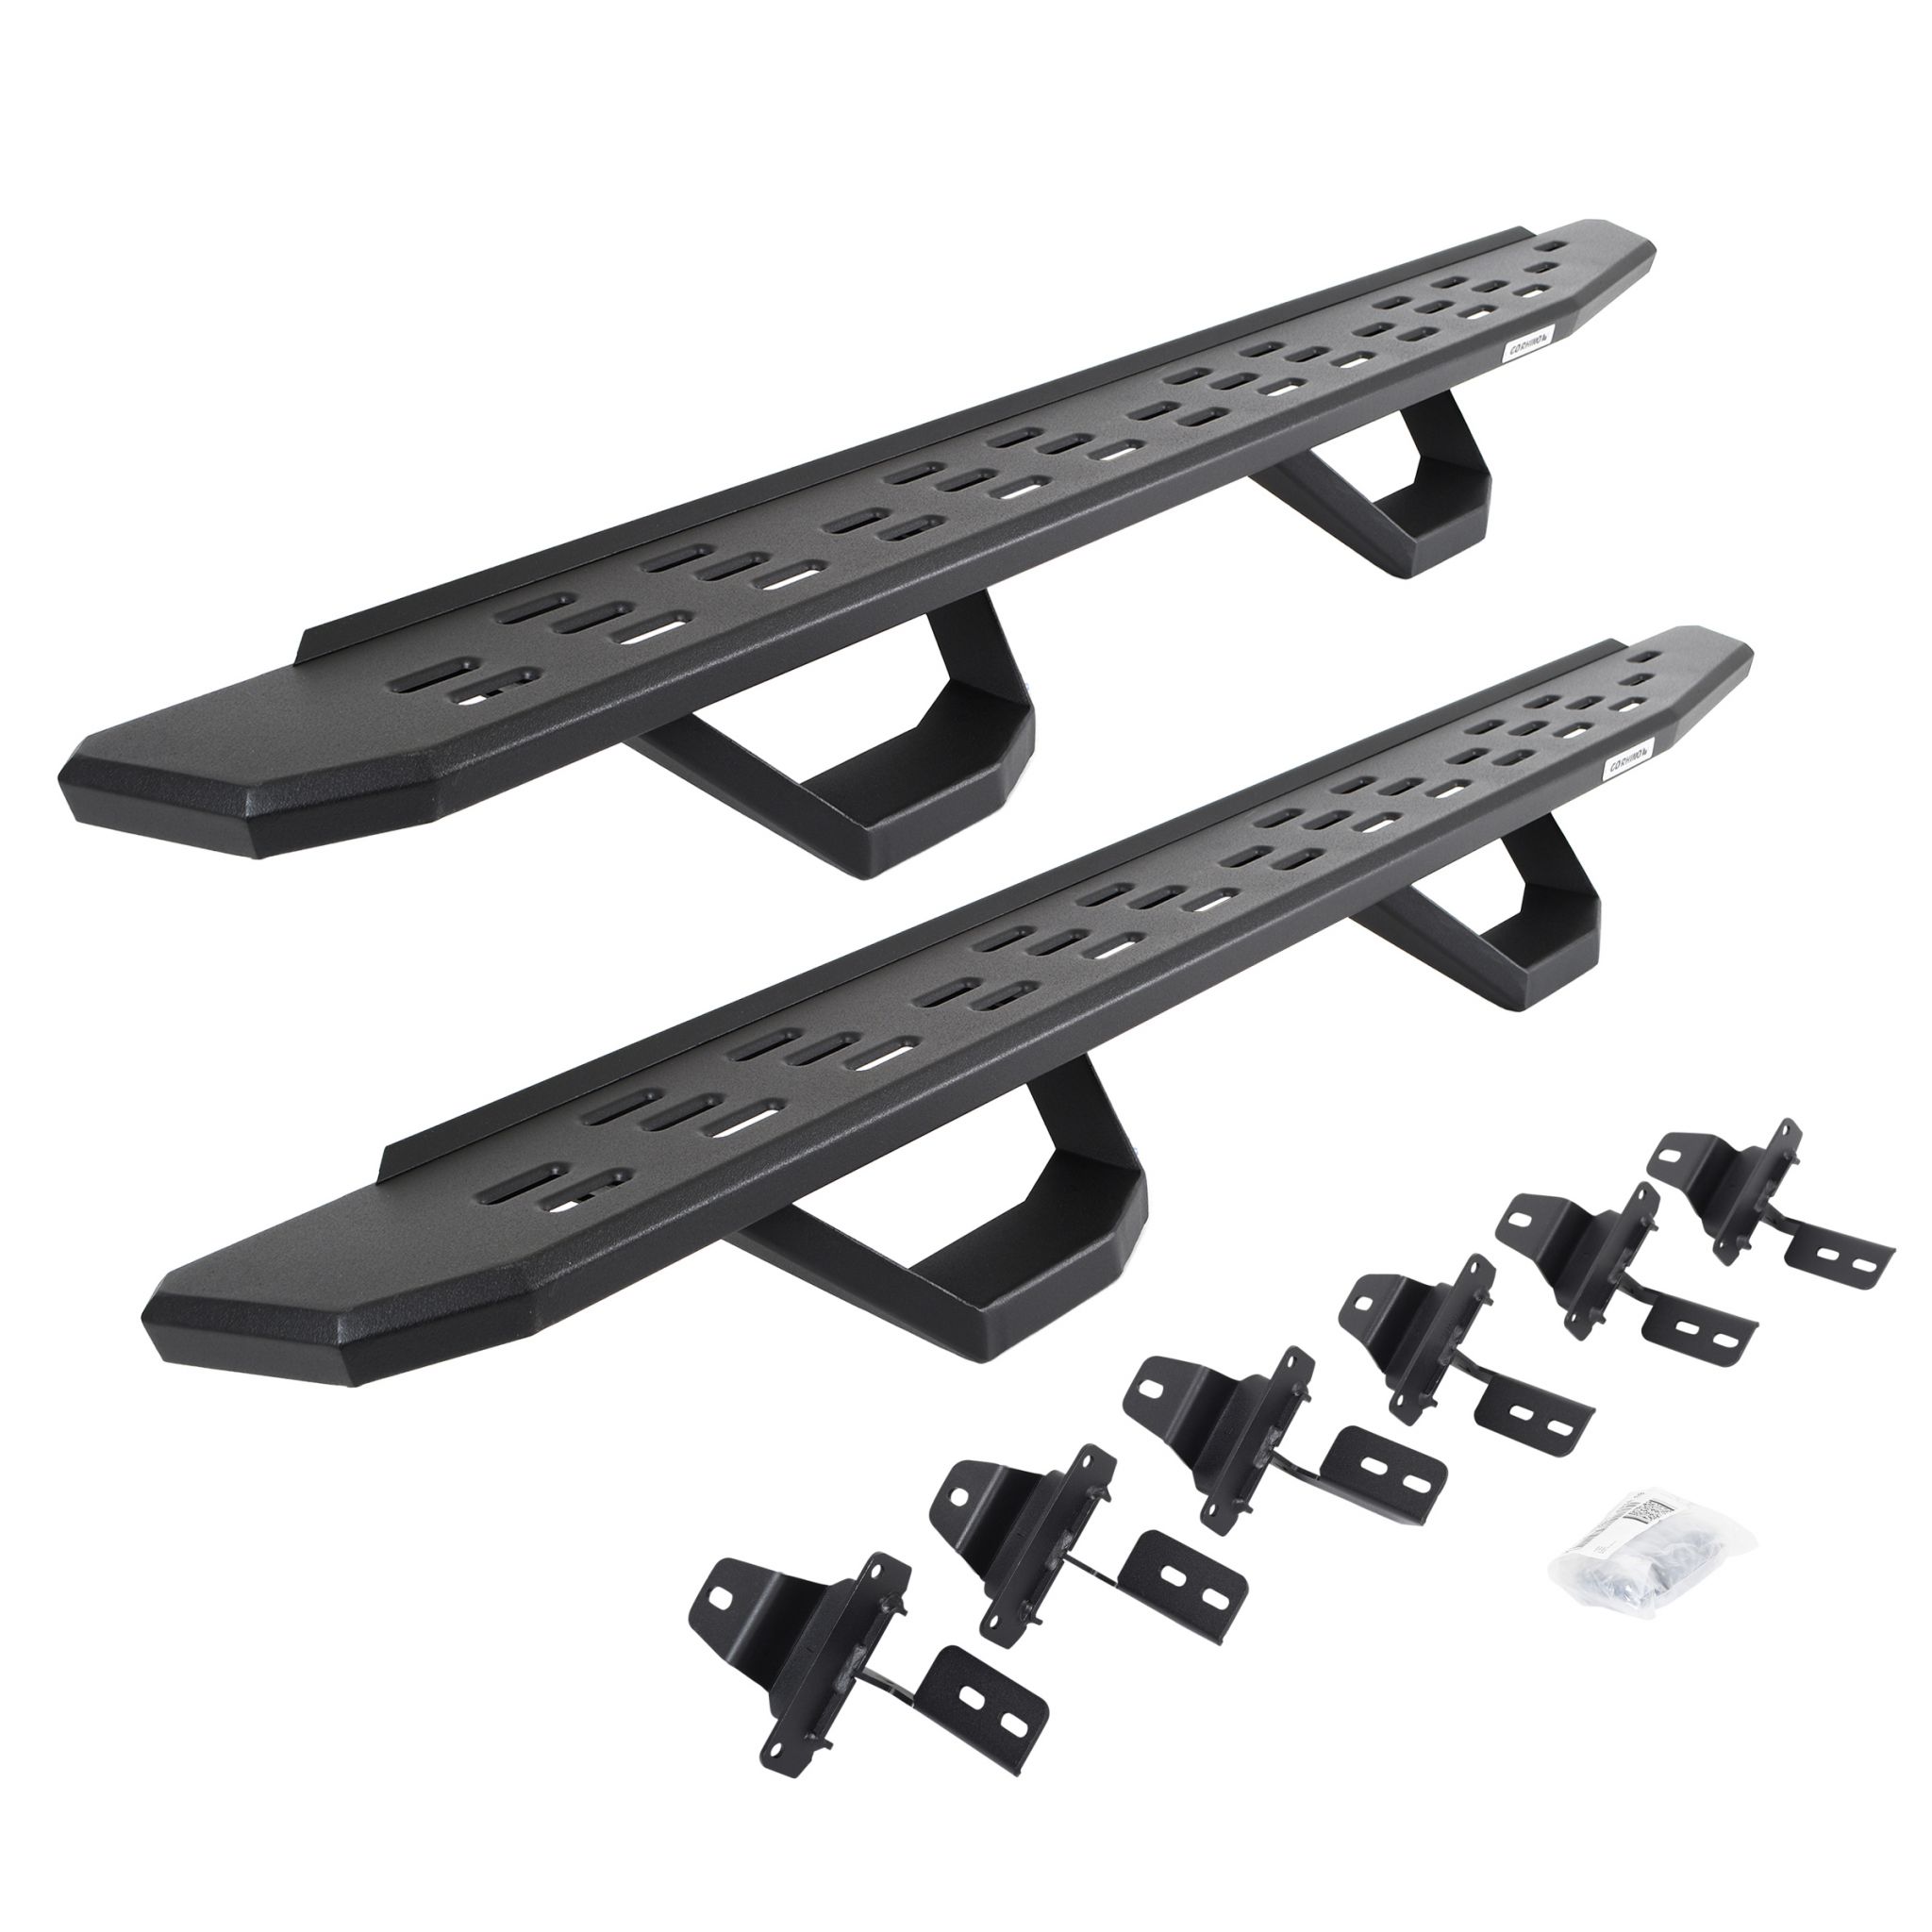 Go Rhino 6965067320PC - RB30 Running Boards with Mounting Brackets & 2 Pairs of Drops Stepst Kit - Textured Black